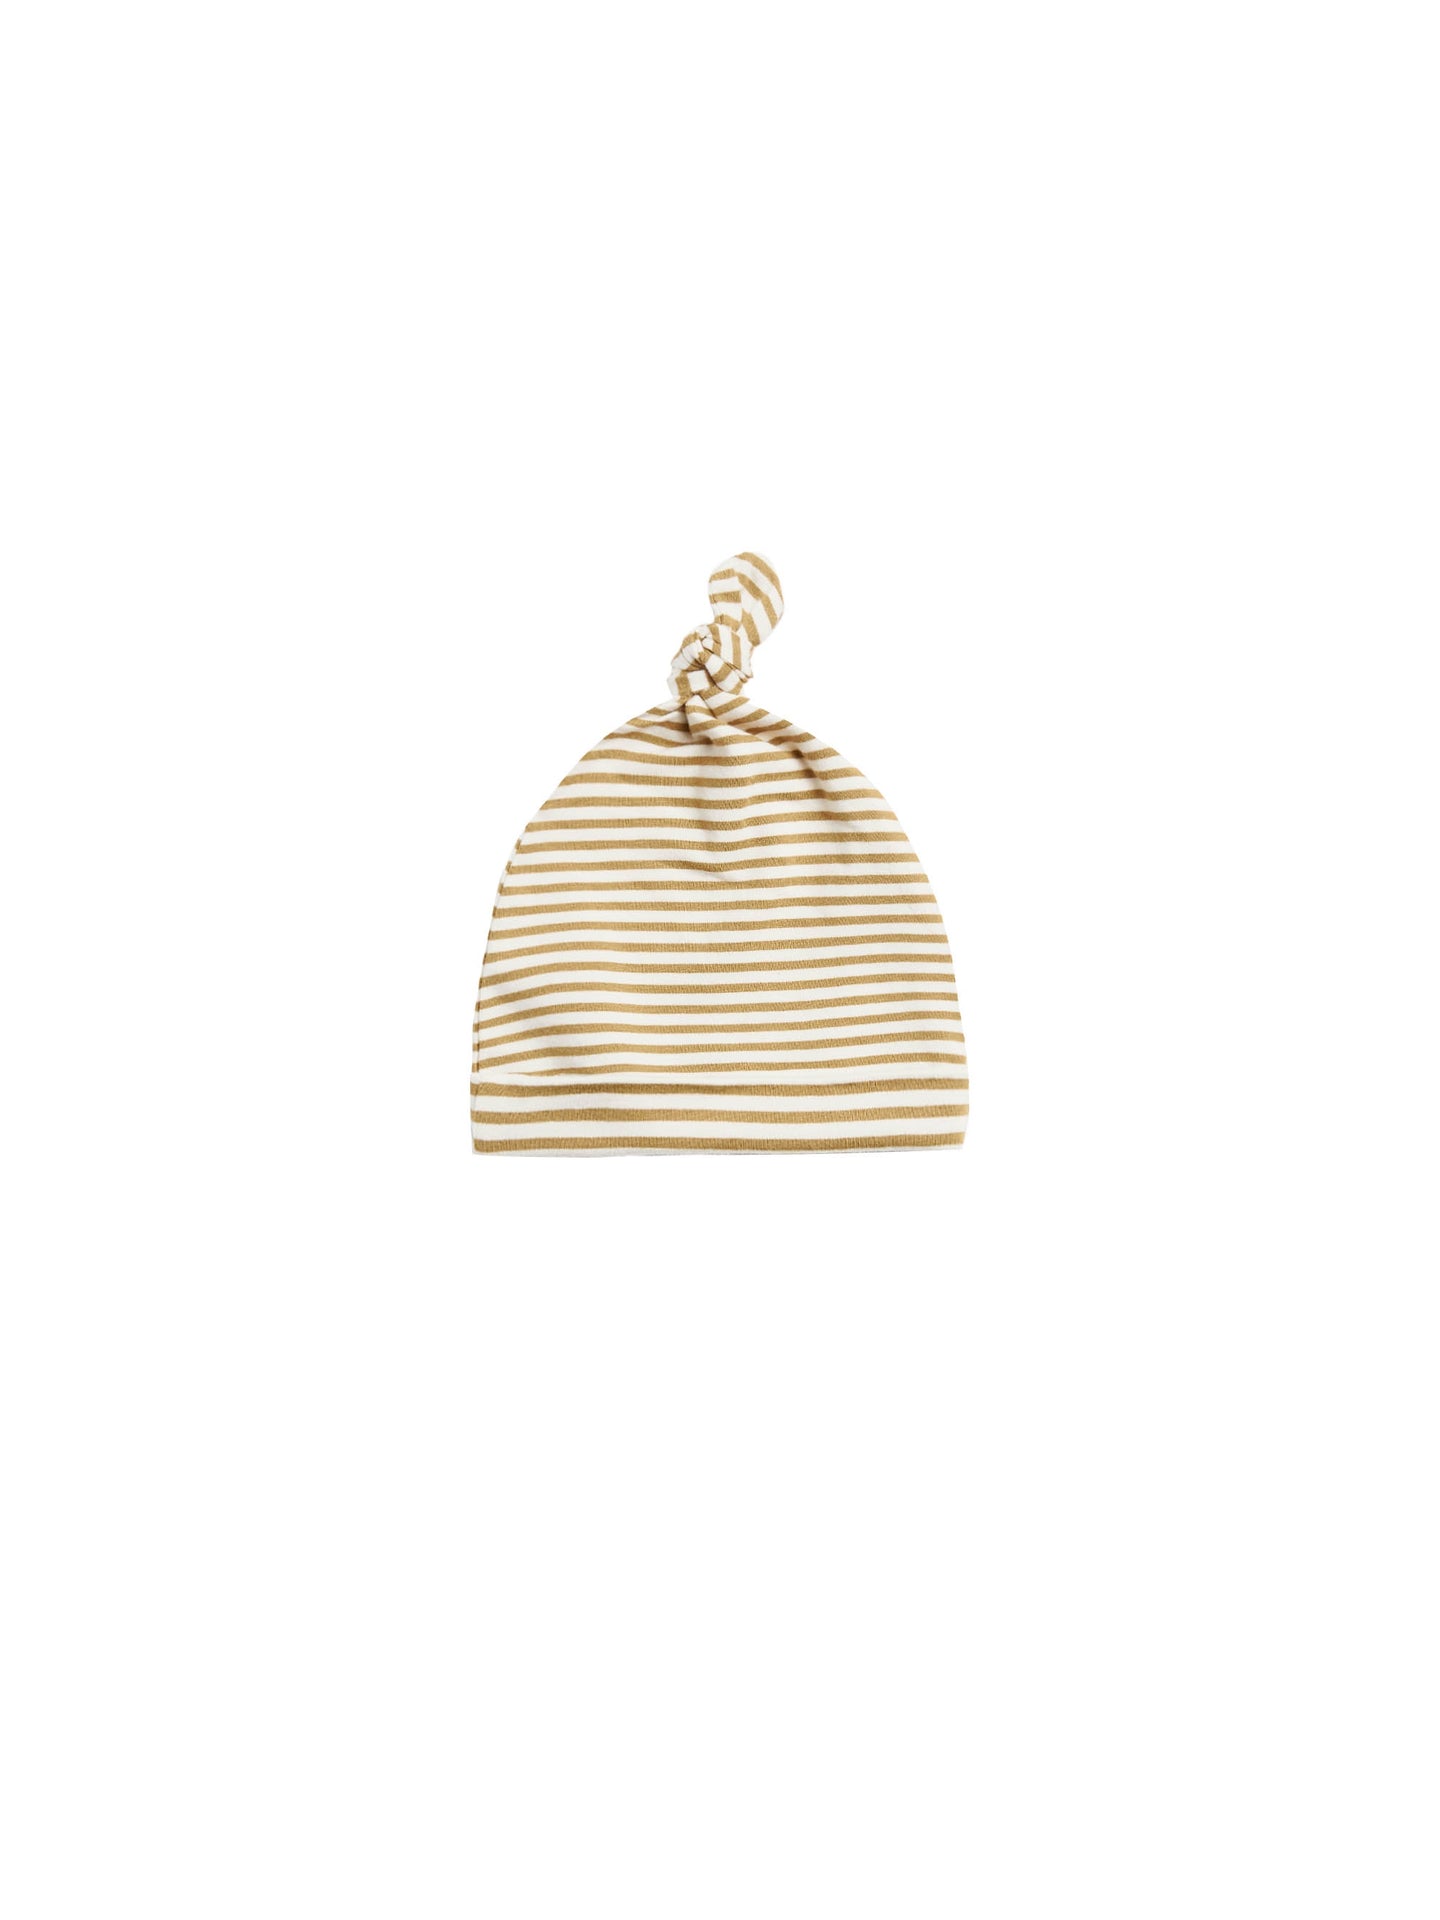 Quincy Mae - Knotted Baby Hat - Gold Stripe